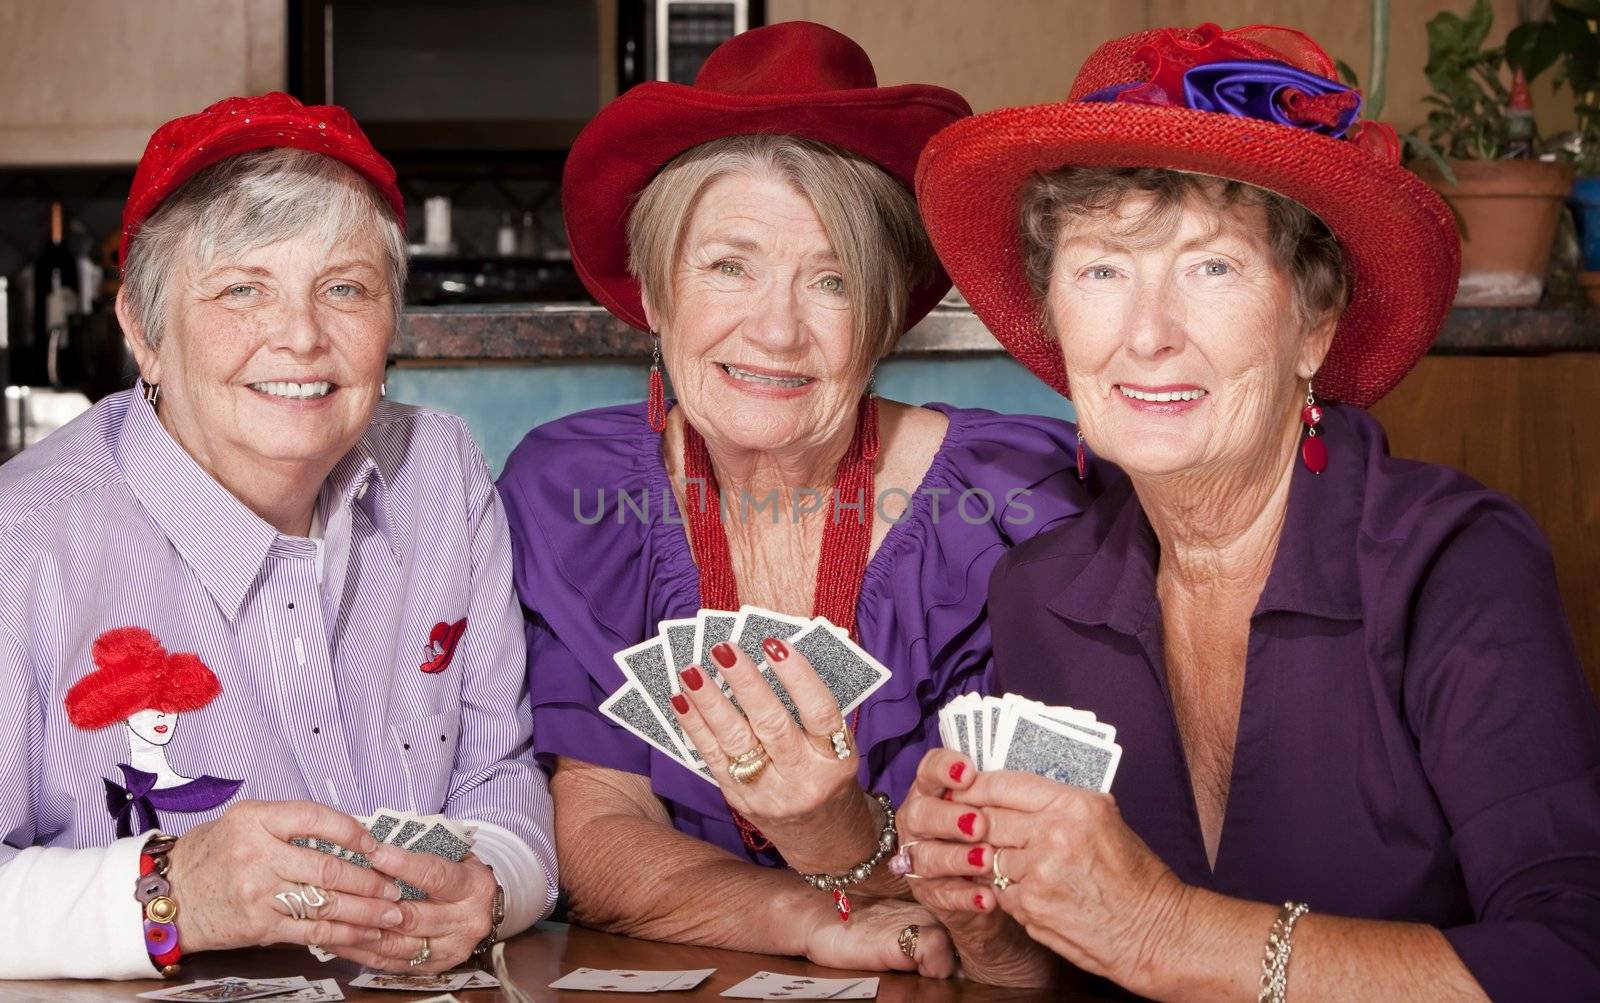 Ladies wearing red hats playing cards by Creatista